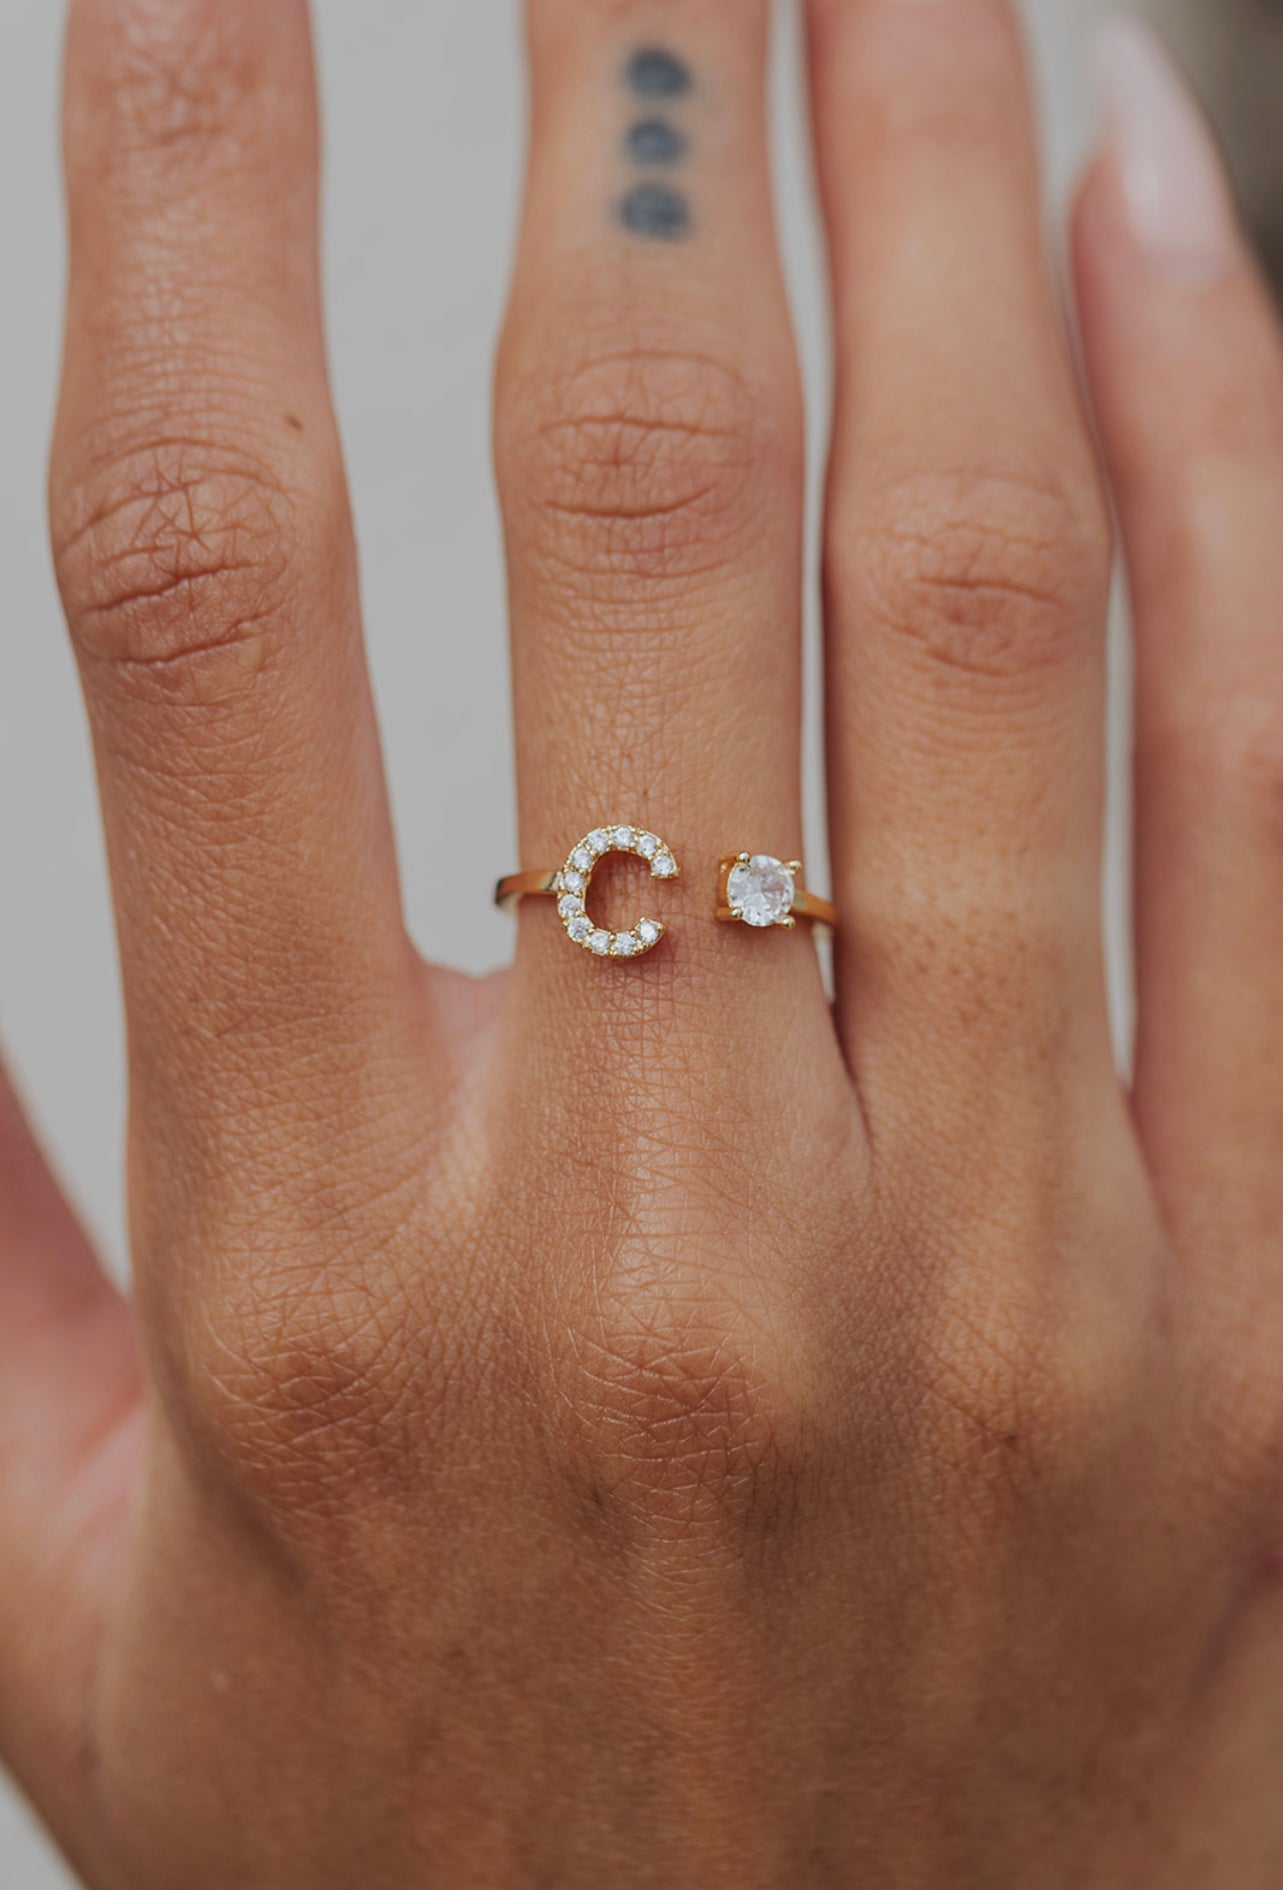 316L Stainless Steel Crystal Initial Ring